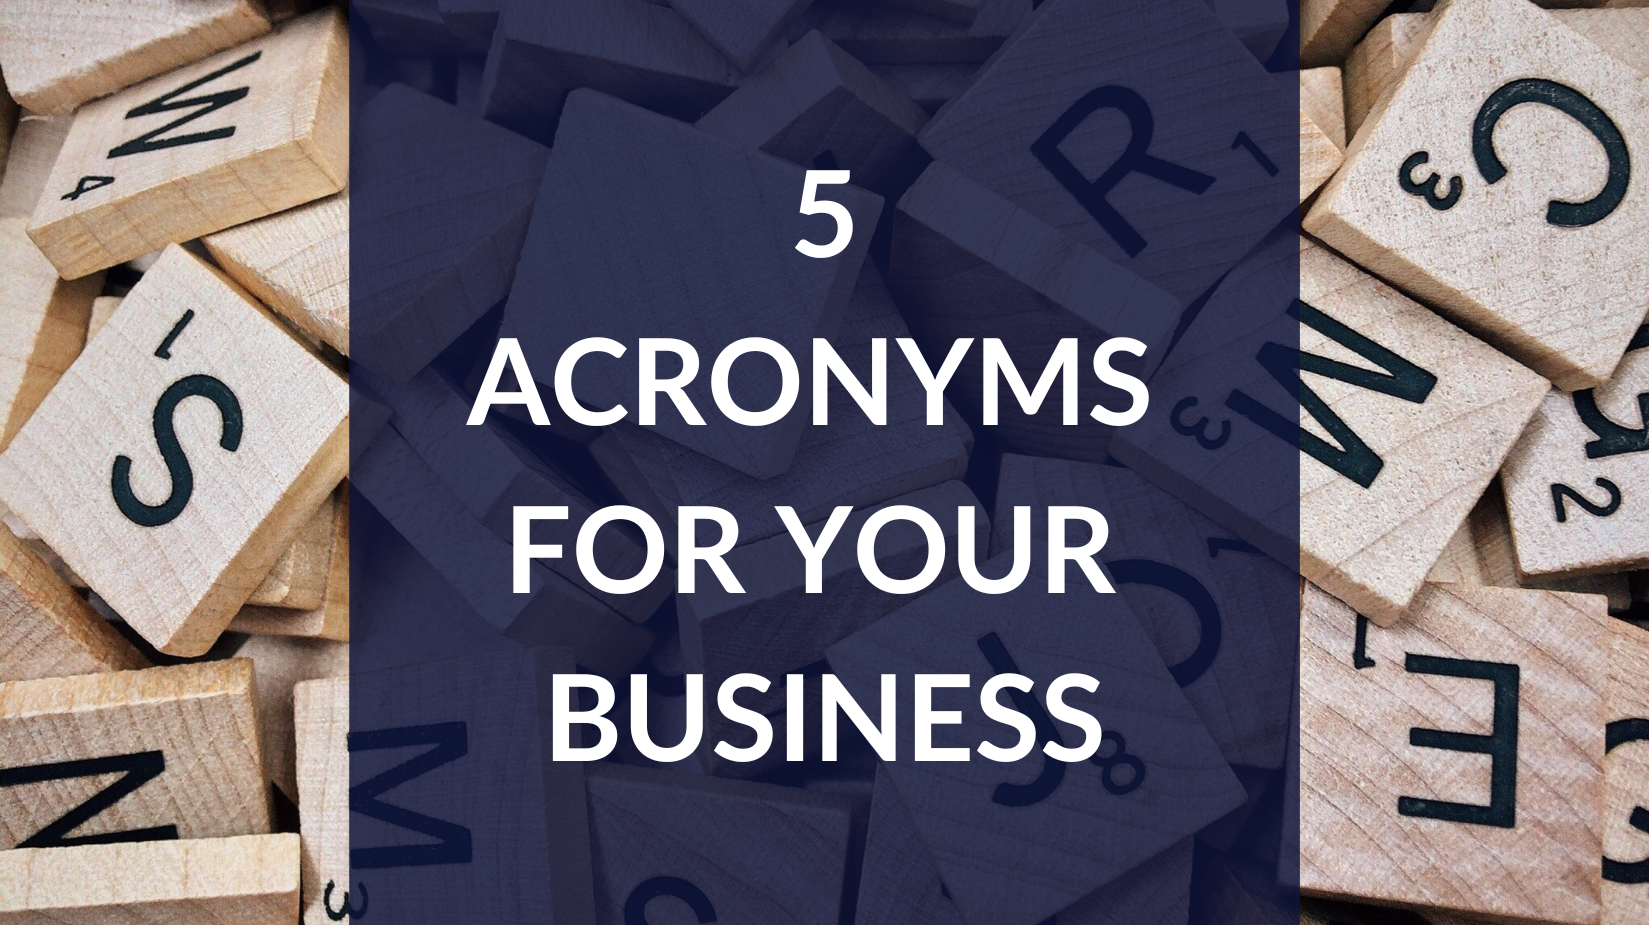 5 Acronyms for your business